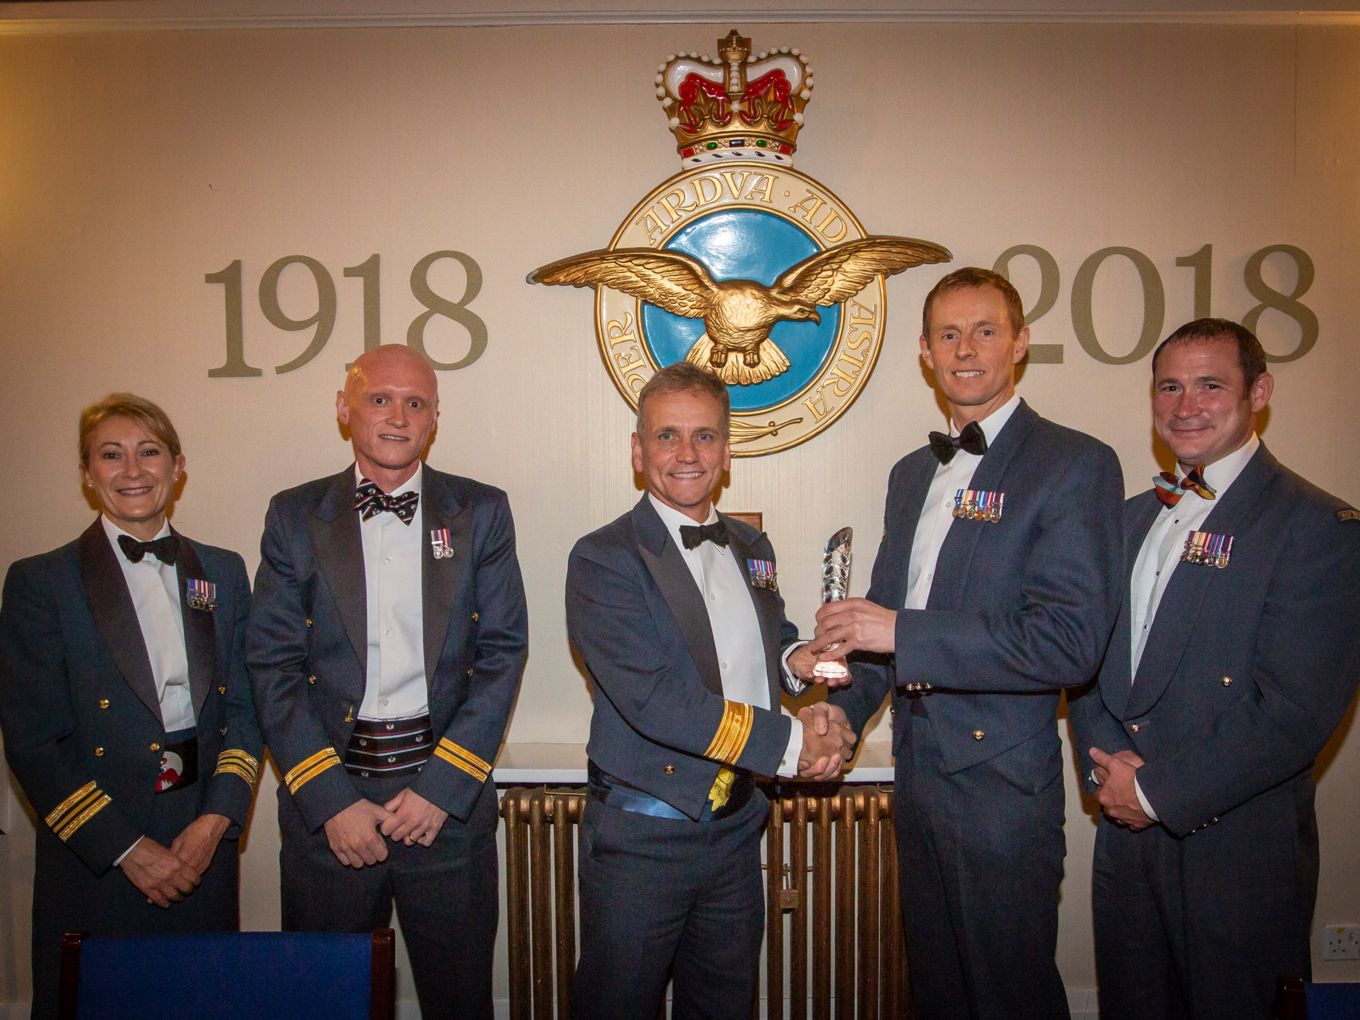 Outstanding Sport Achievements Recognised At RAF Wittering Royal Air